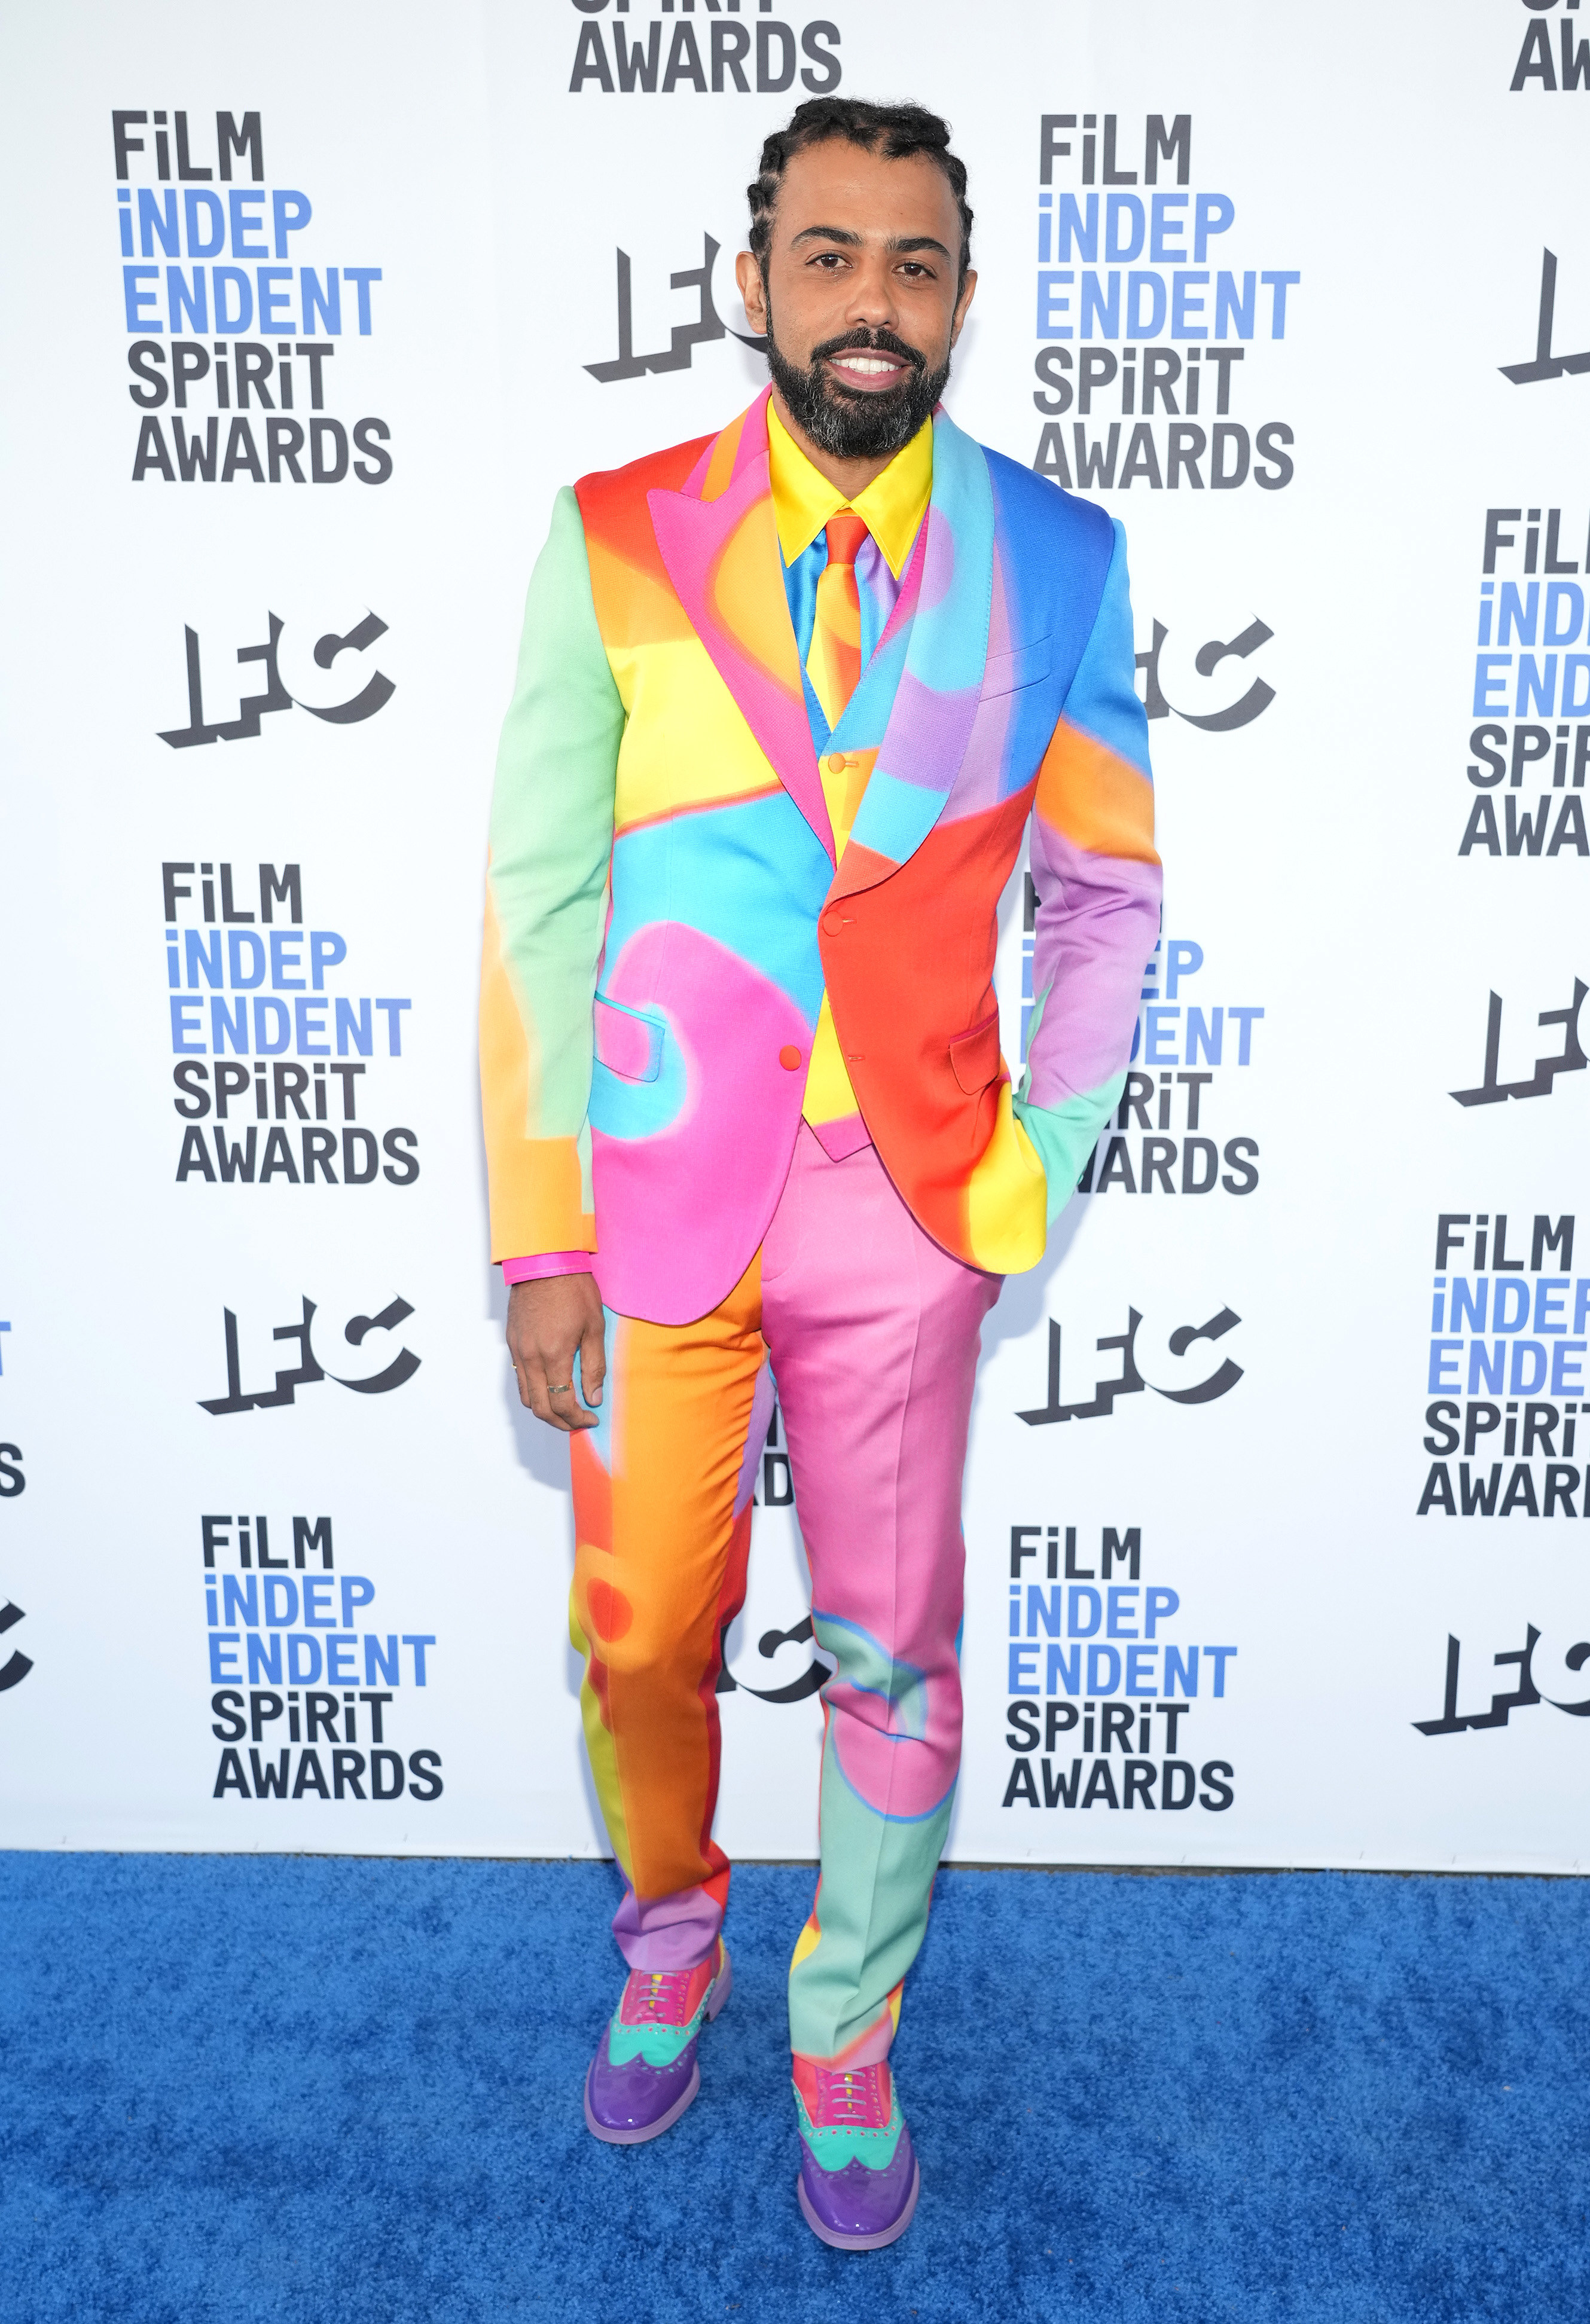 Daveed wears a suit with random splatters of pastel colors